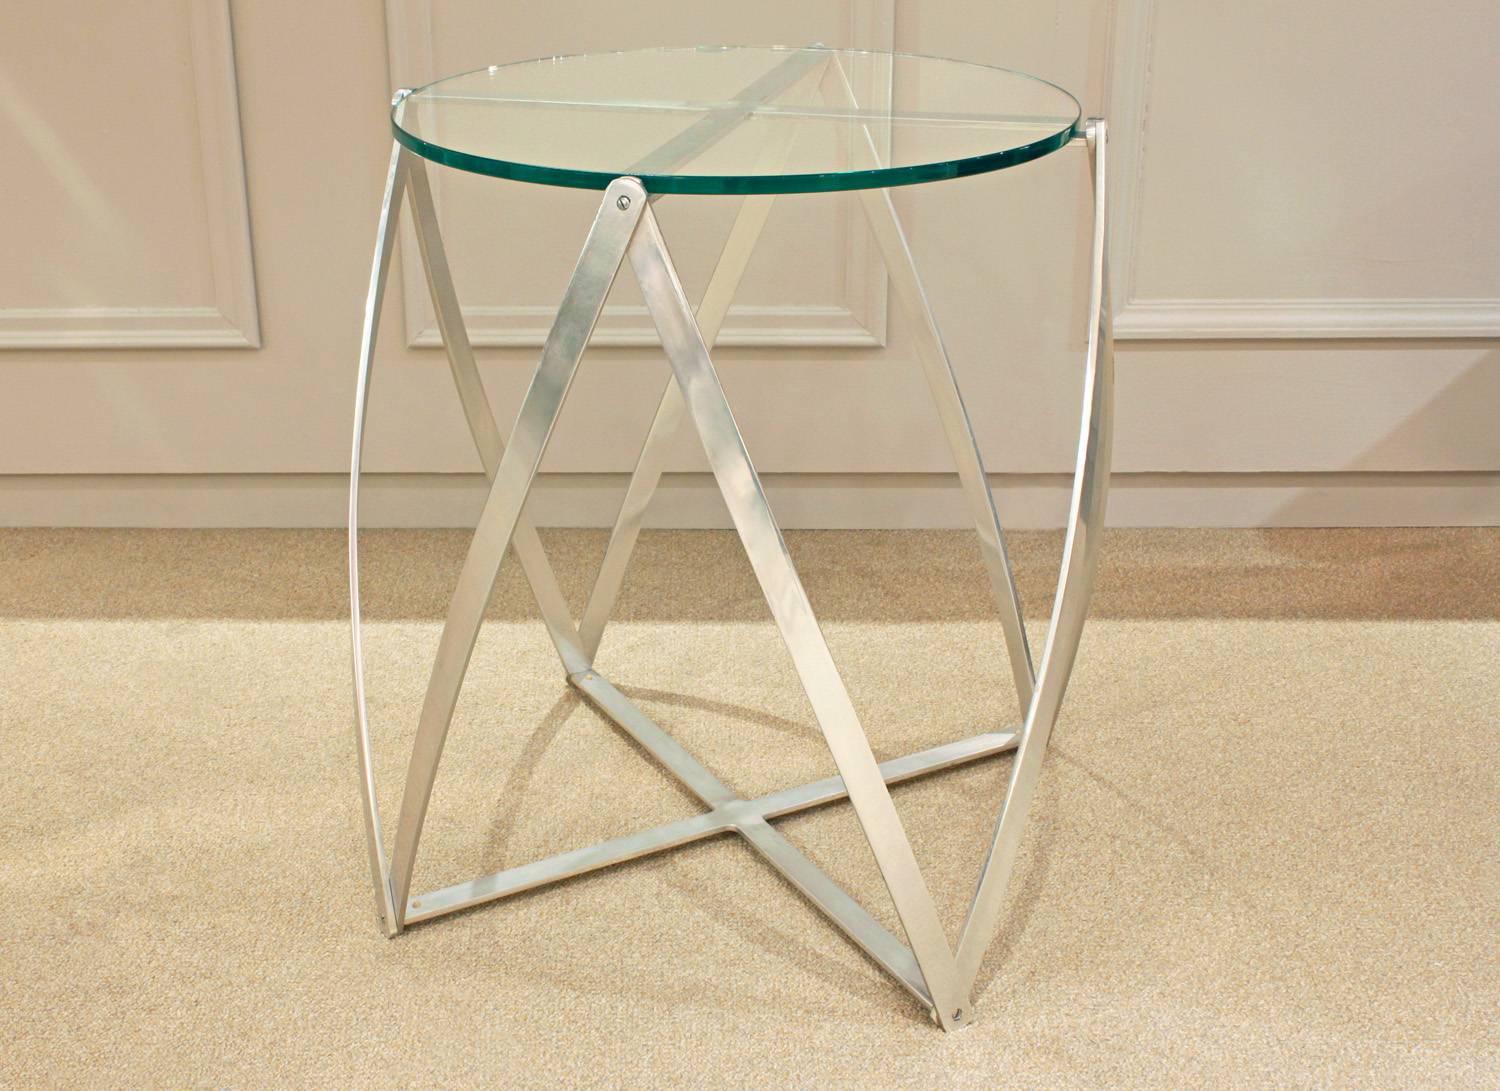 Sculptural end table in brushed aluminum with inset glass top by John Vesey, American, 1970s.